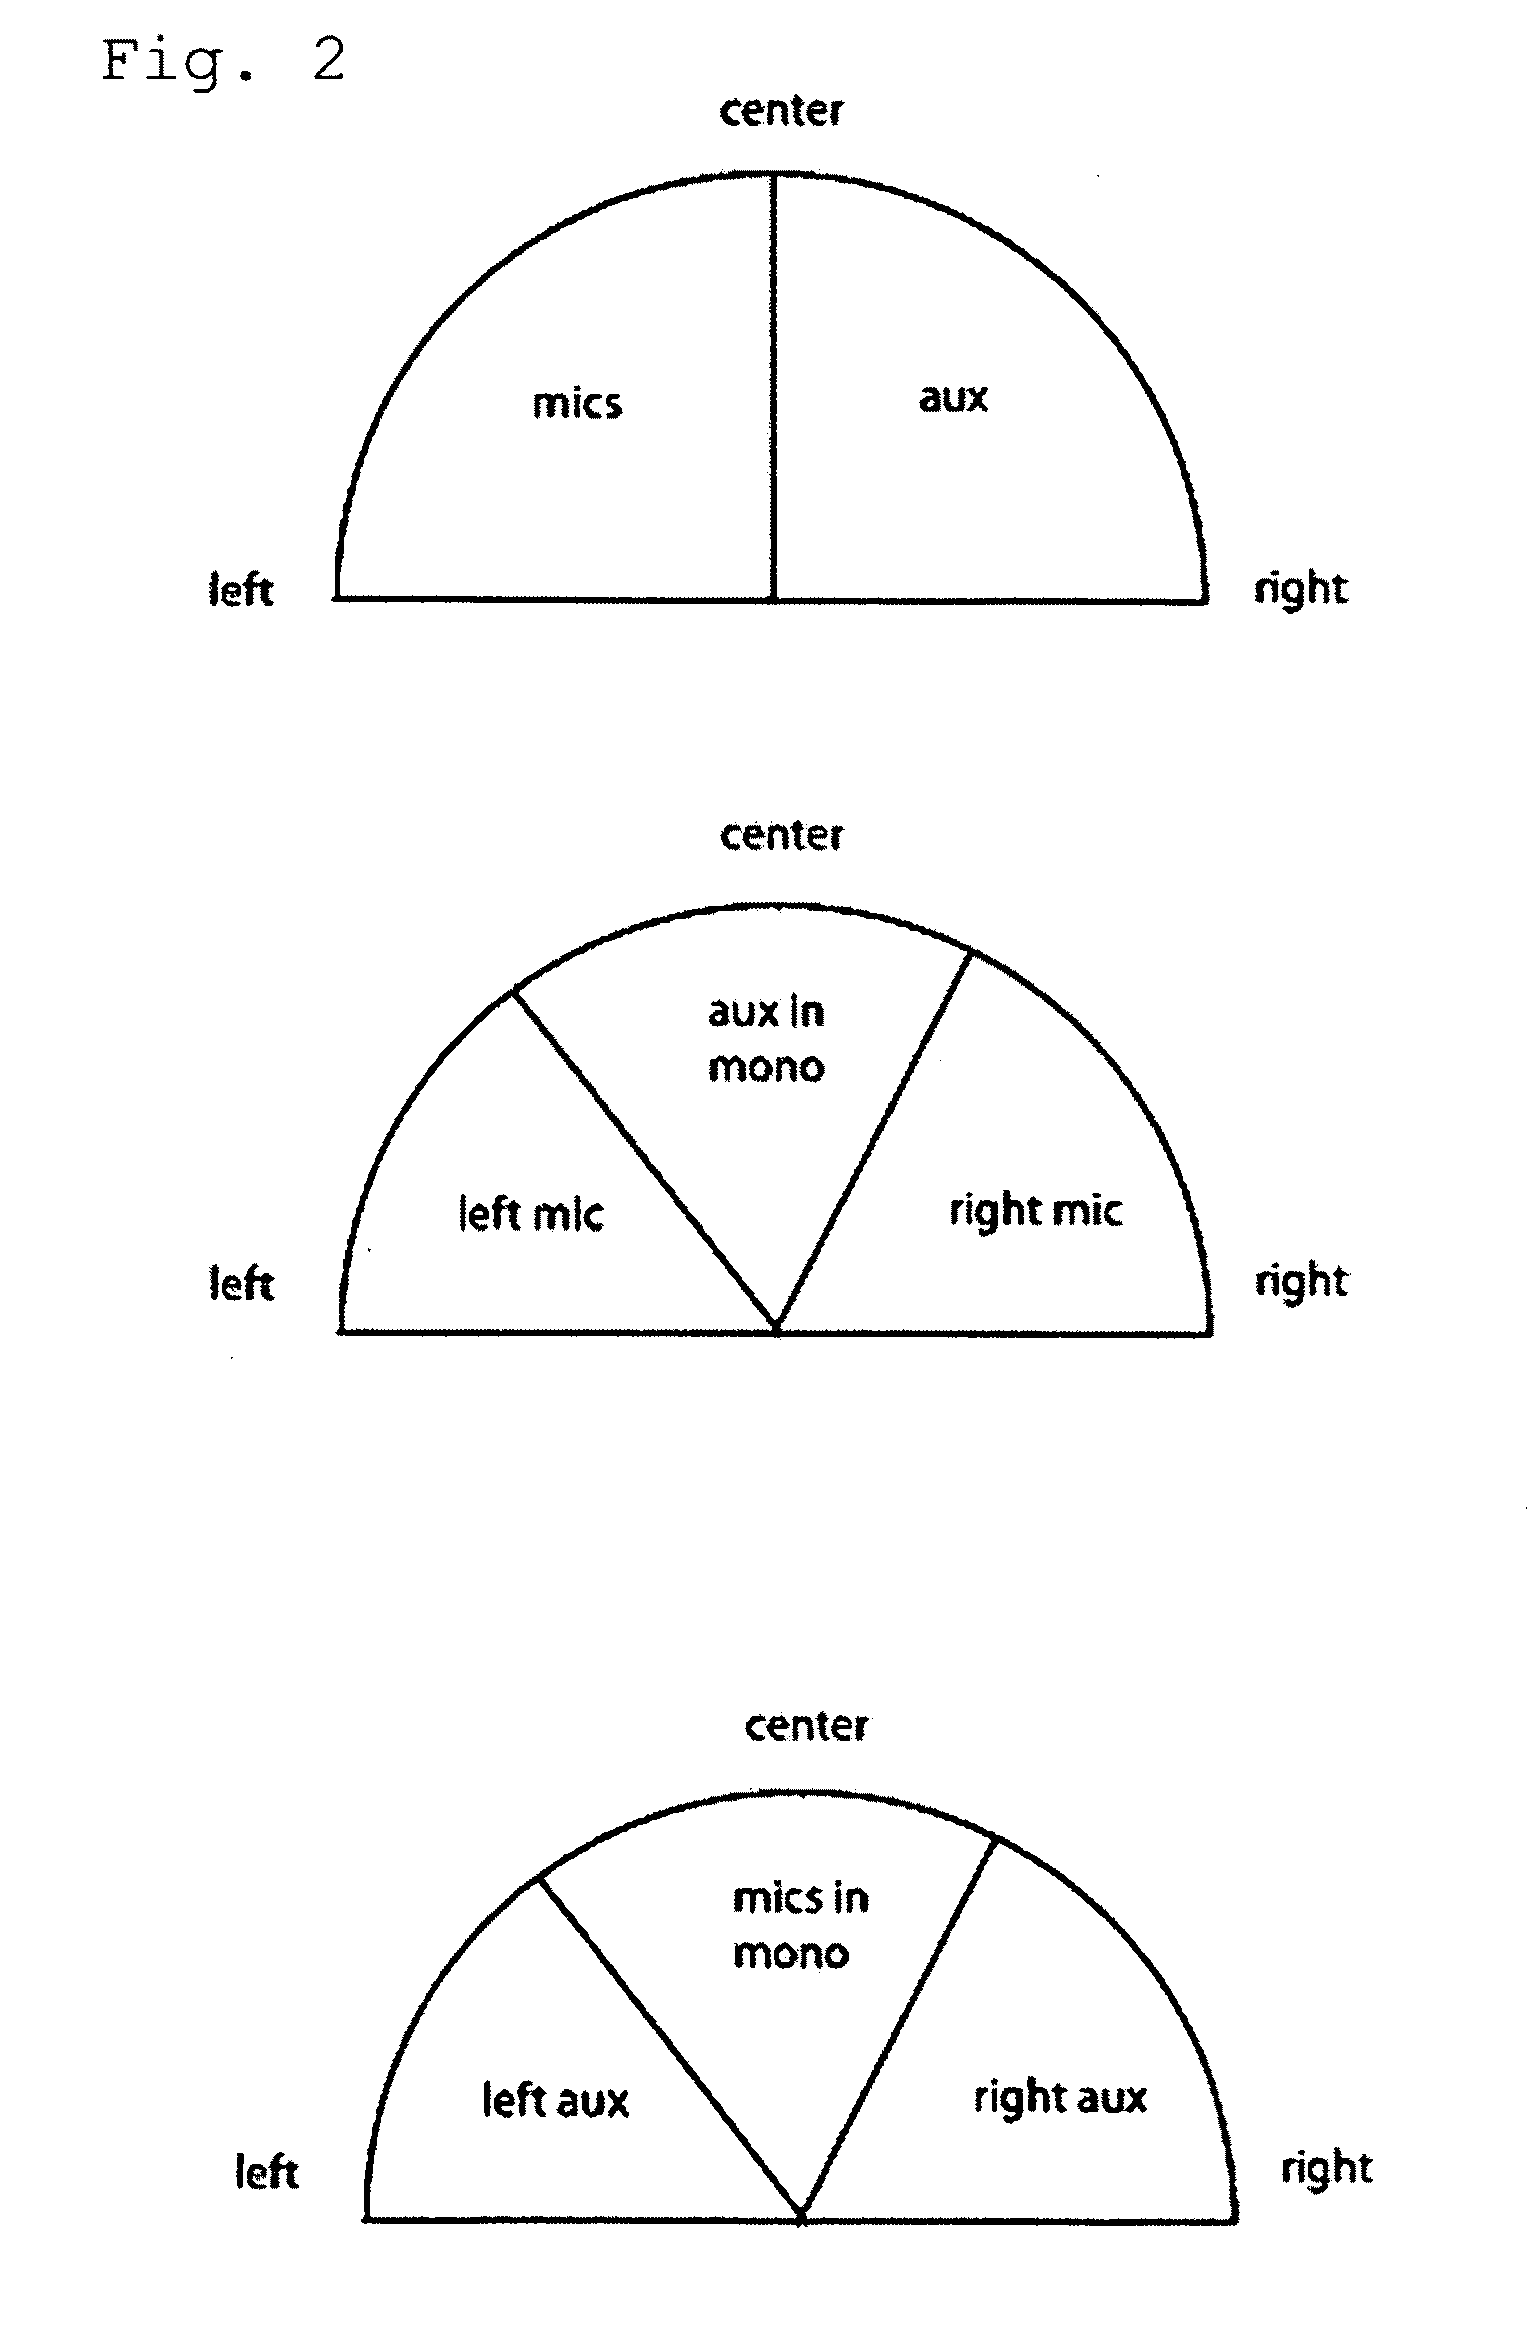 Mixable earphone-microphone device with sound attenuation